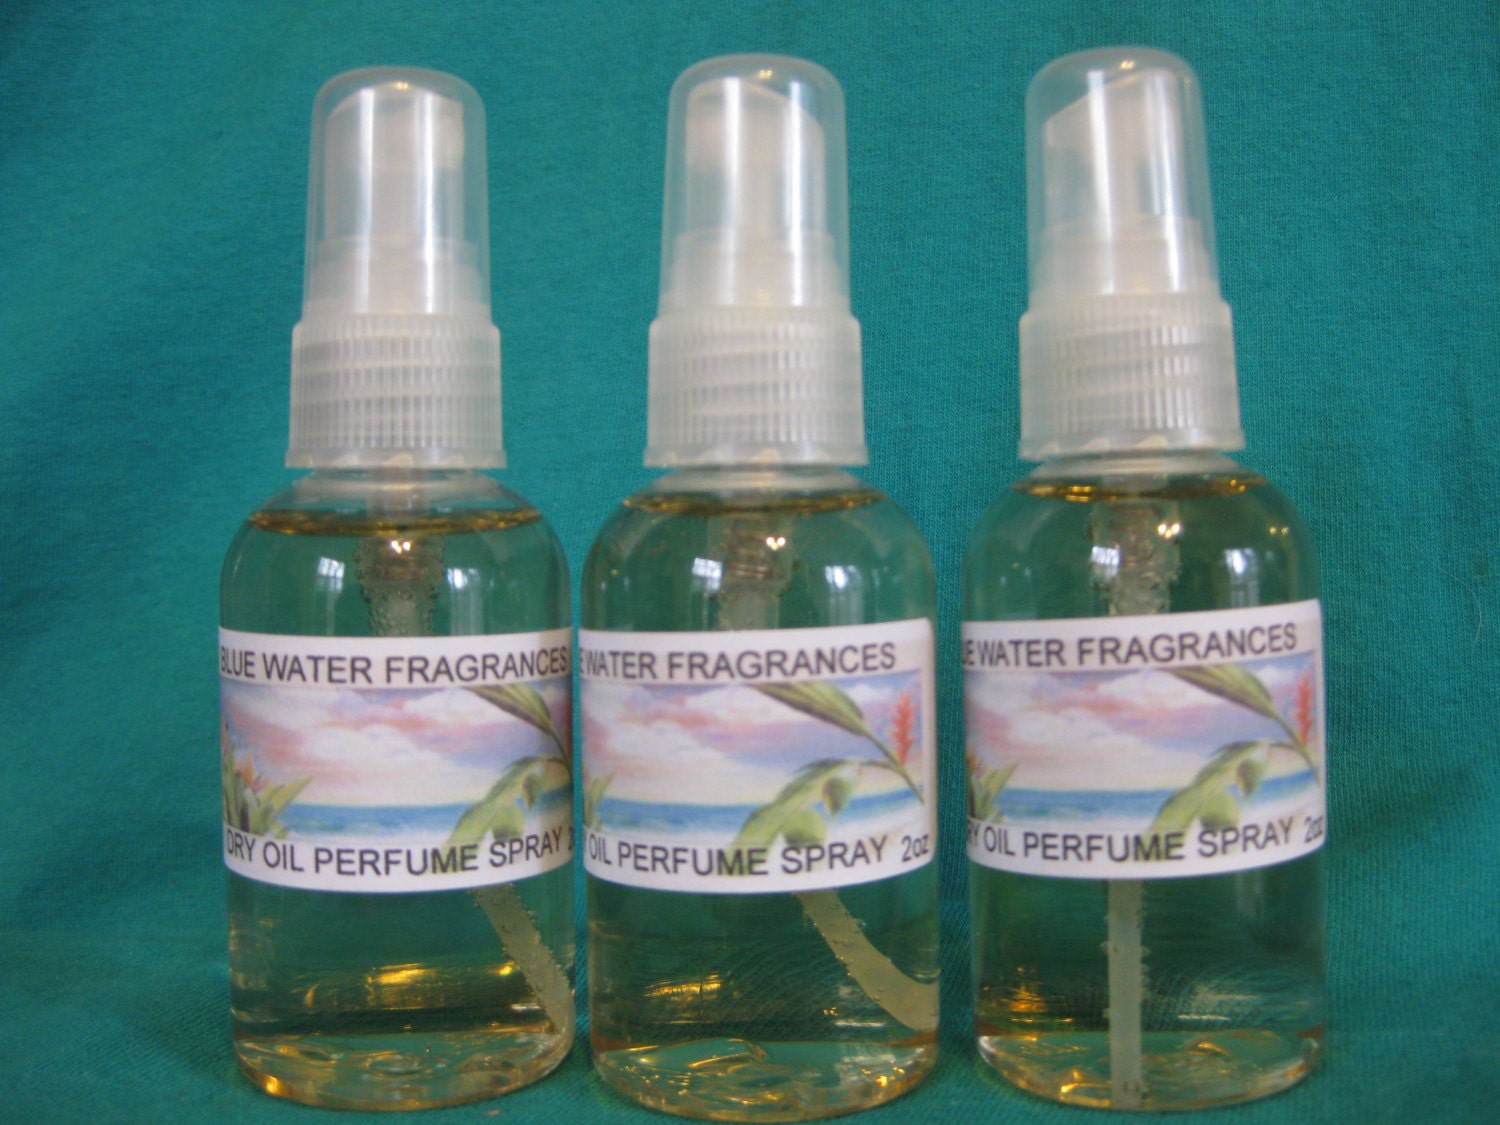  Quality Fragrance Oils' Impression #102, Inspired by Tobacco  Vanille (10ml Roll On) Cologne Body Oil : Beauty & Personal Care